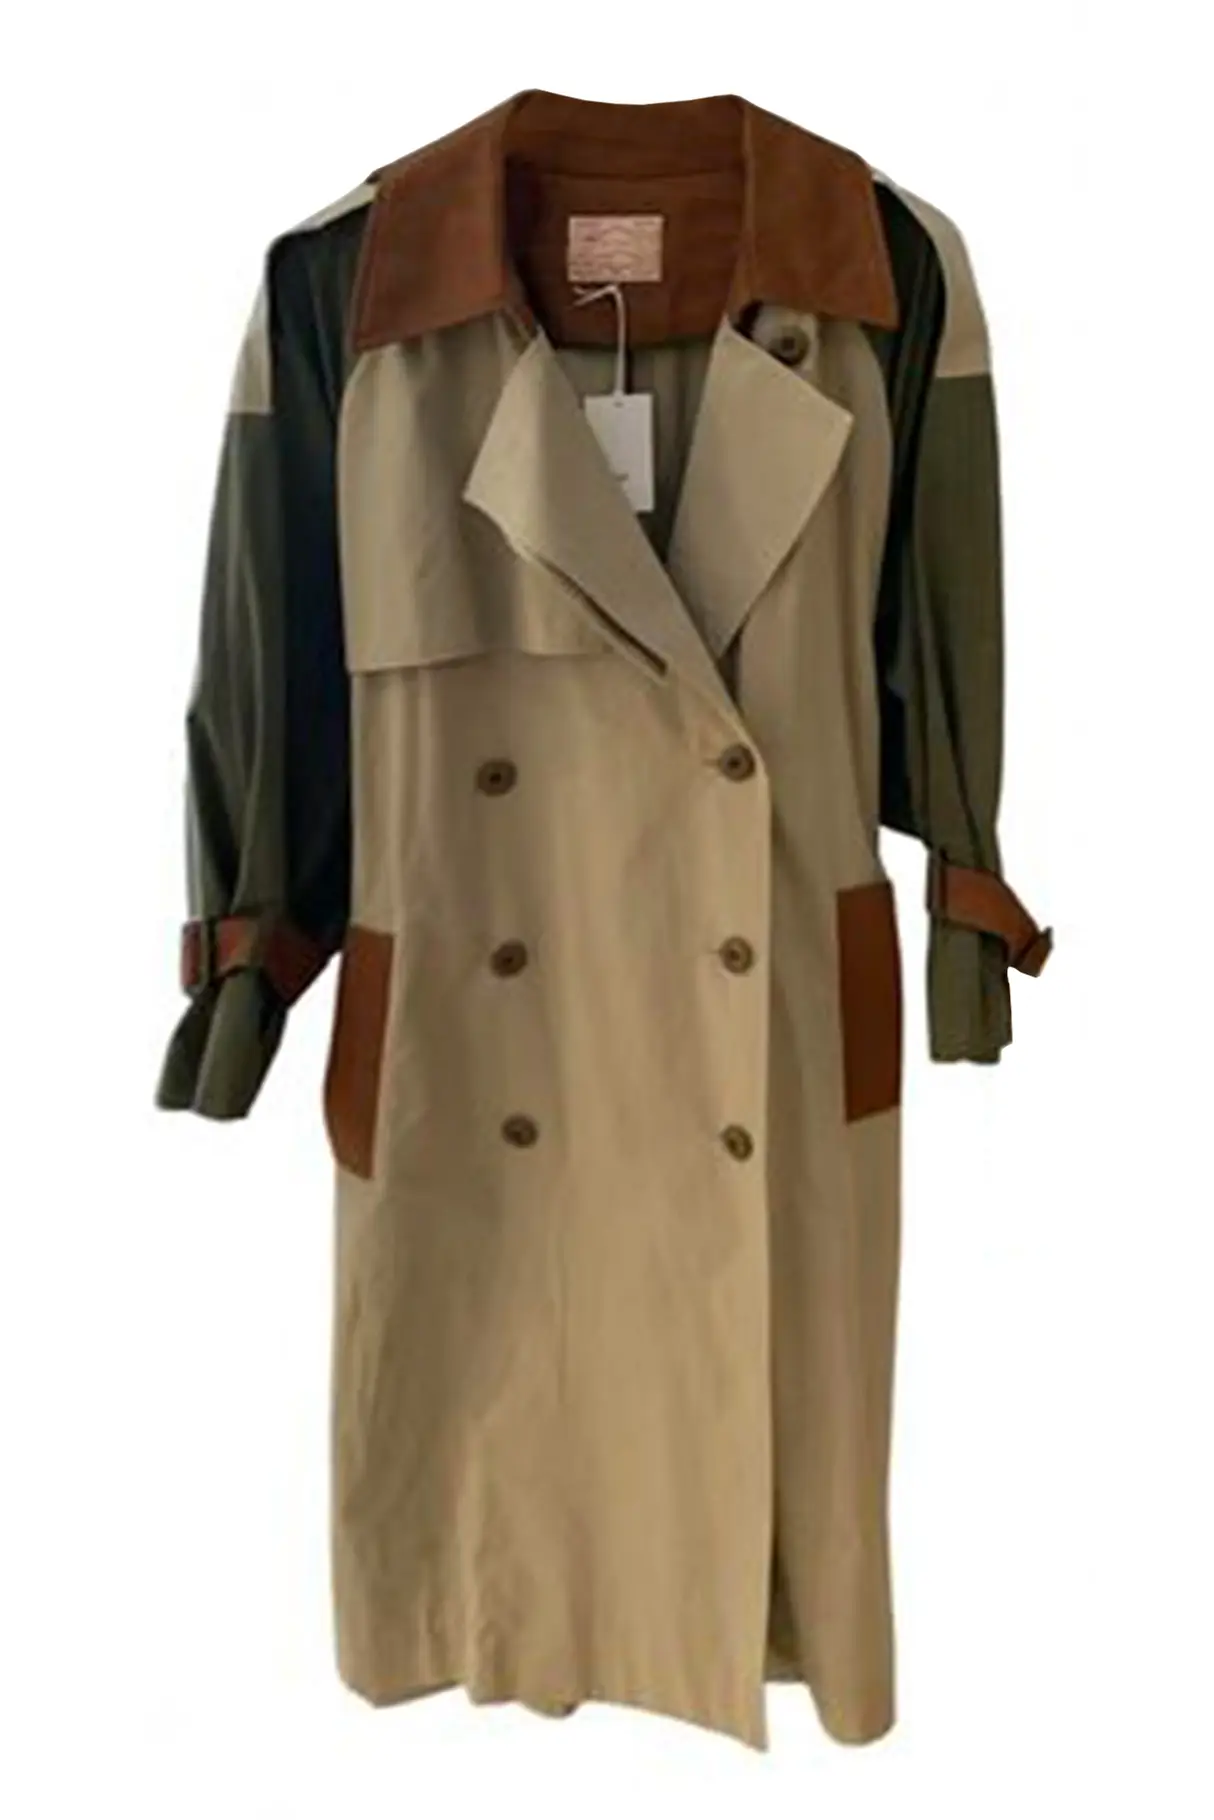 multi-colored-trench-coat-the-frankie-shop.jpg